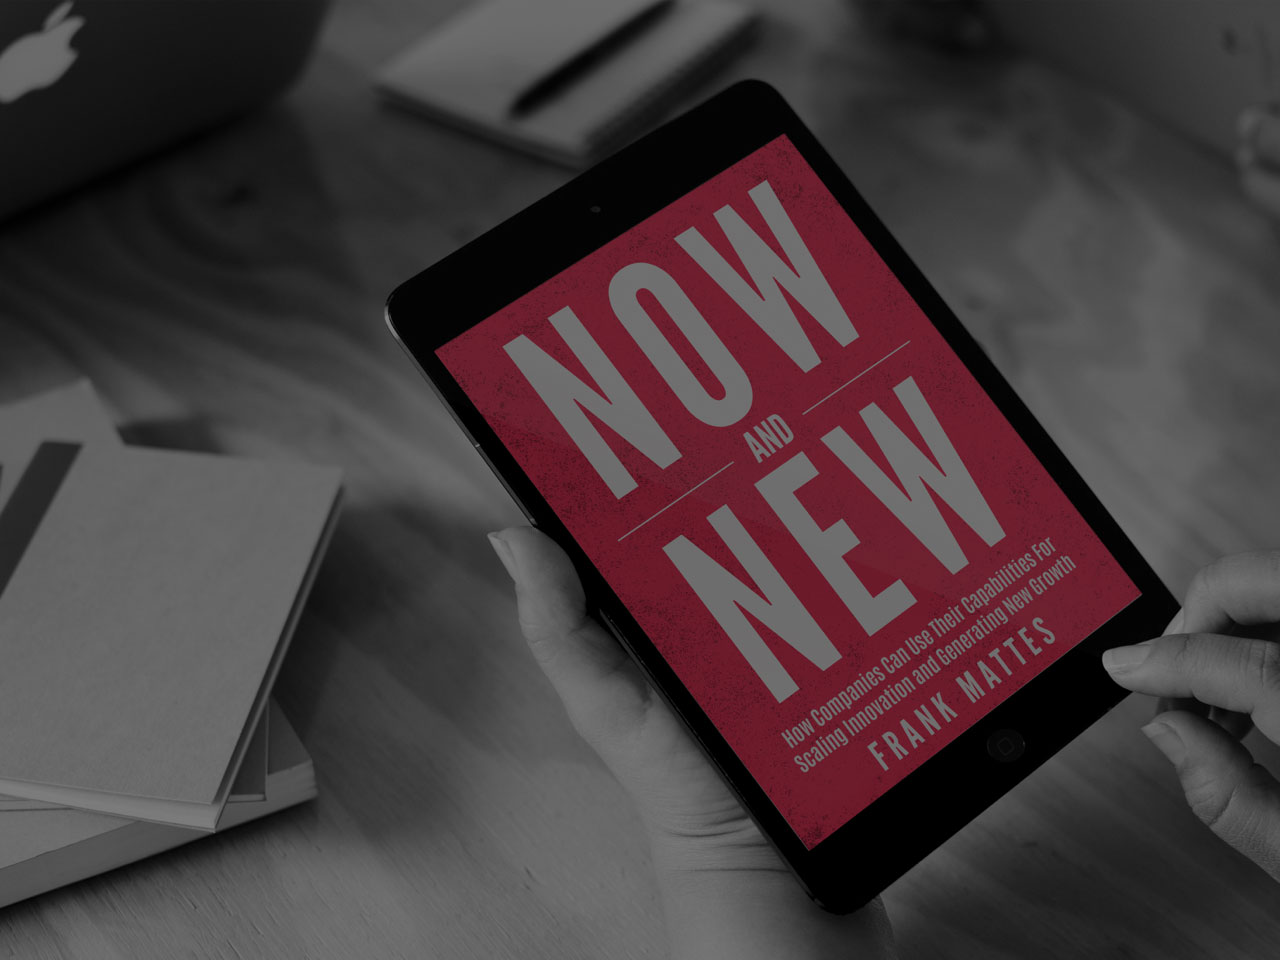 Person holding a tablet displaying the book cover of 'Now and New' by Frank Mattes, focused on scaling innovation and generating new growth.